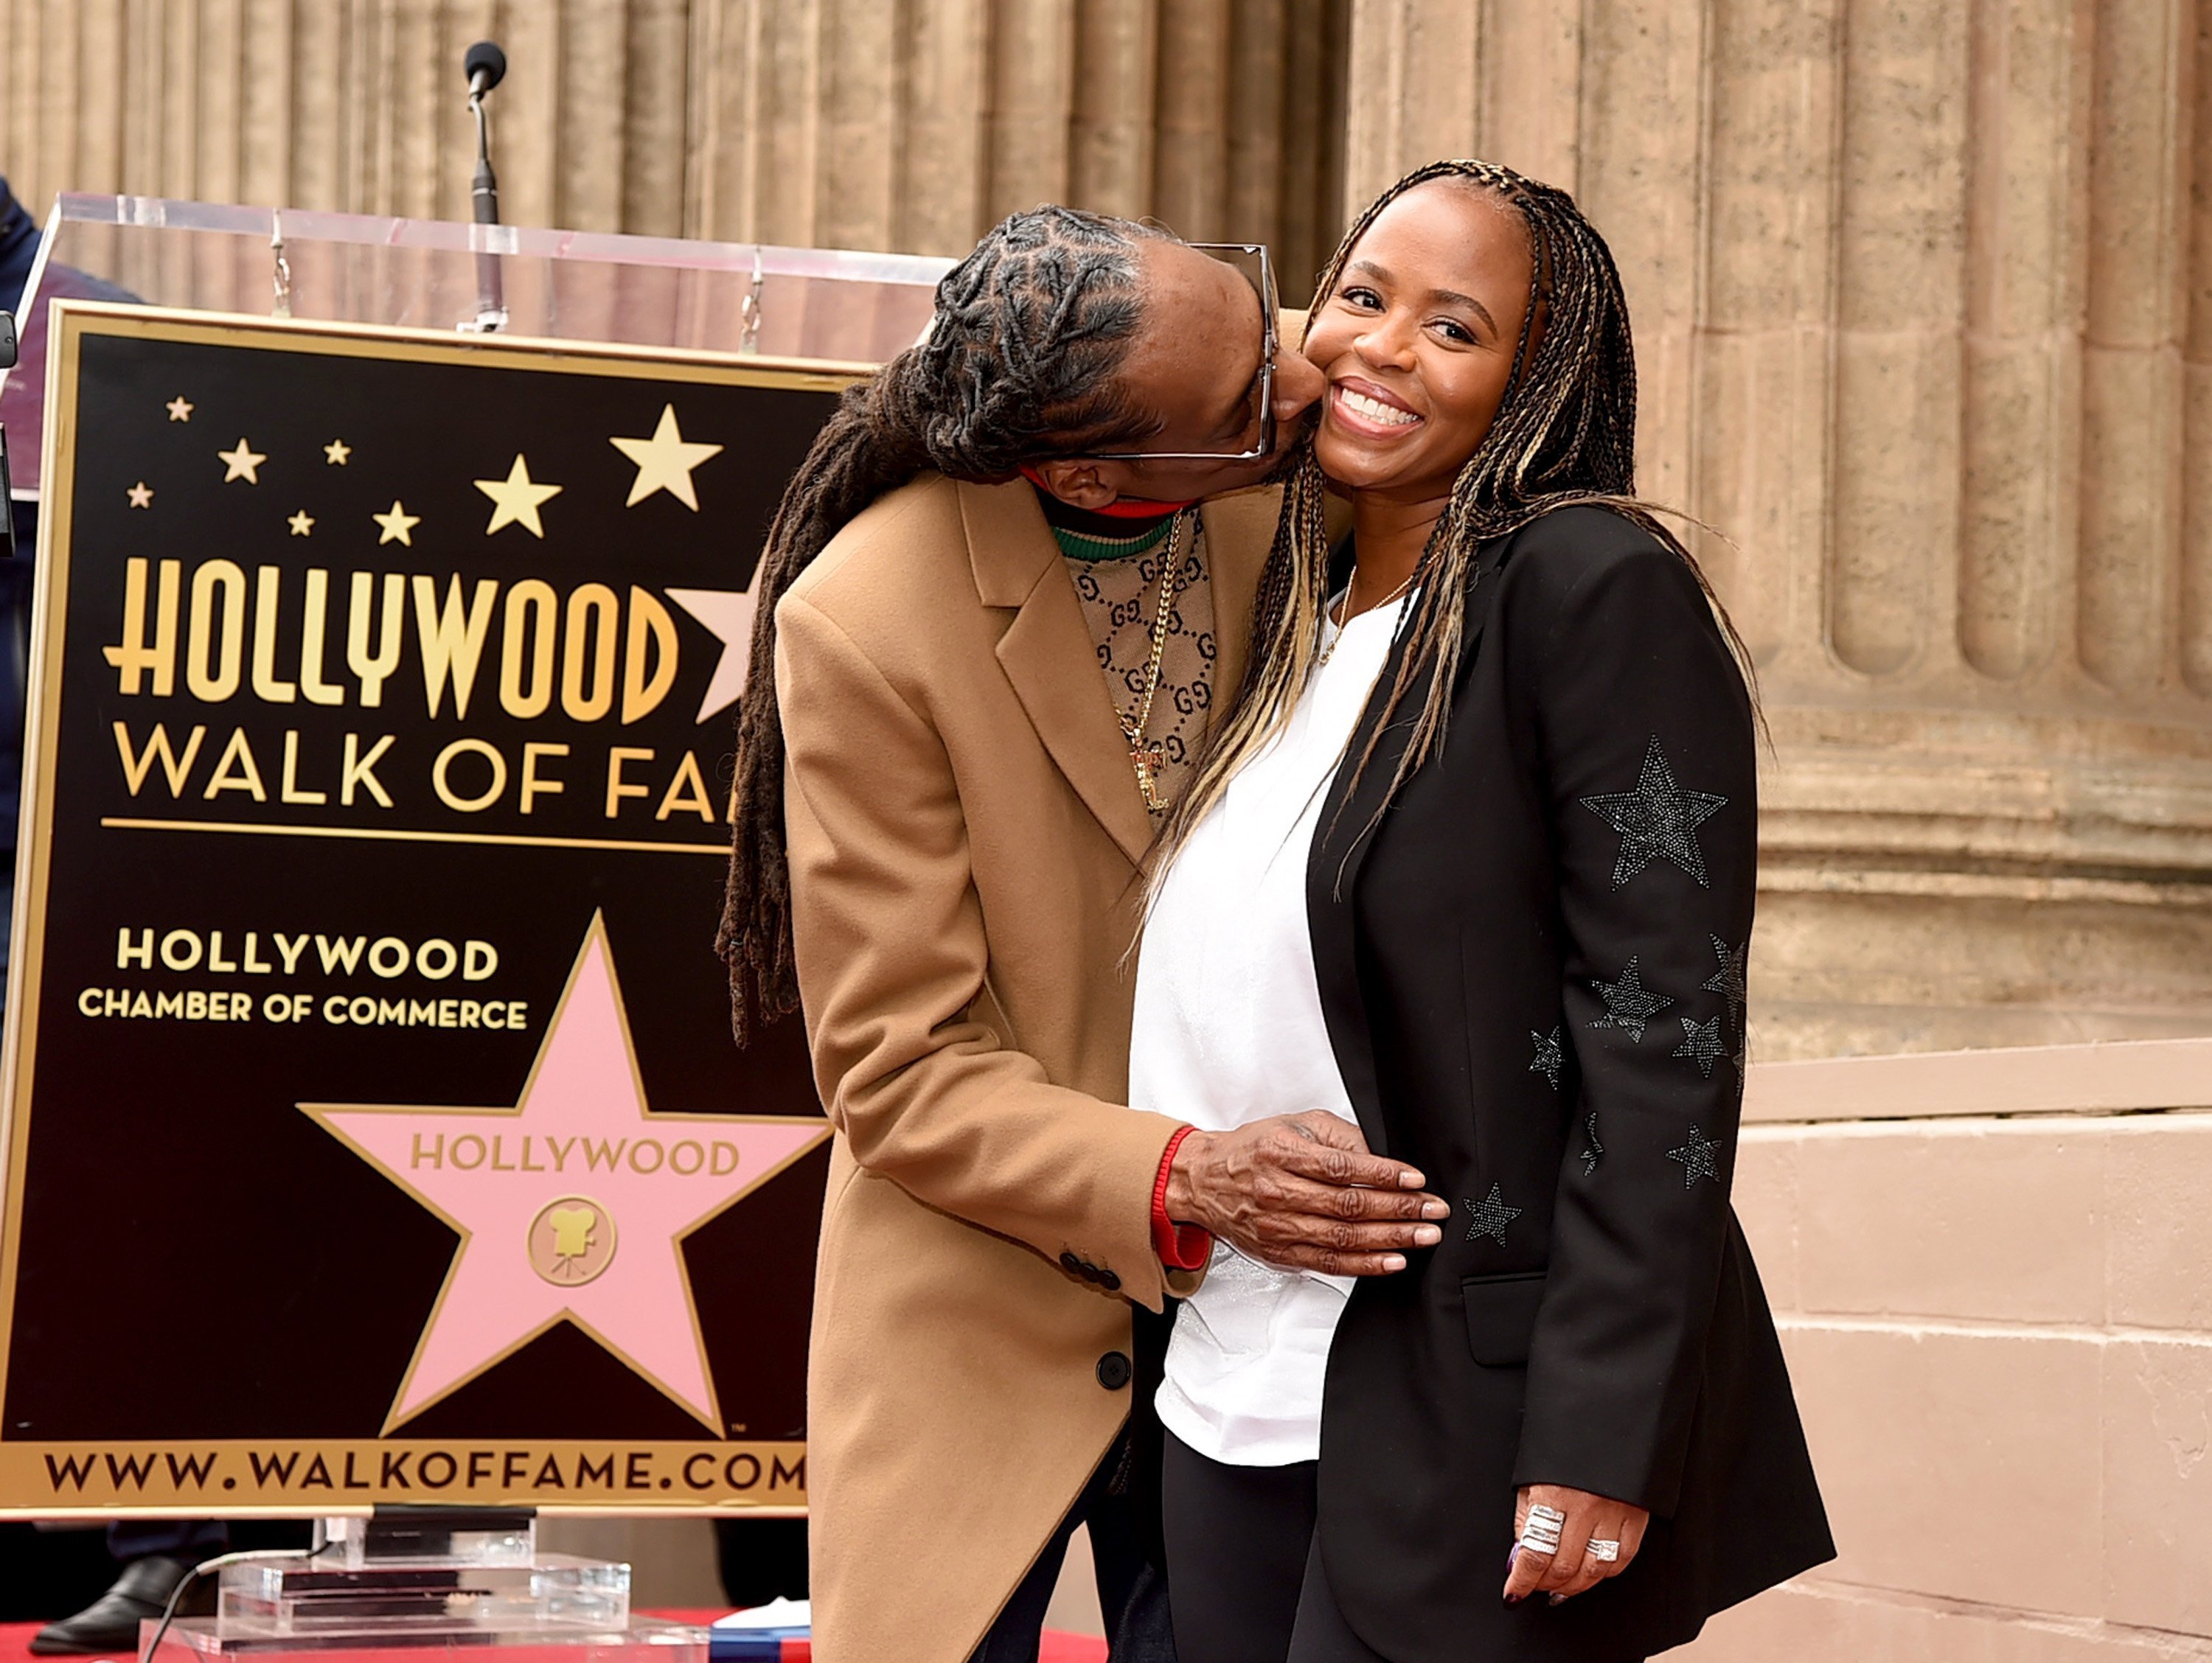 Snoop Dogg, with his wife Shante Broadus, is honored with a star on The Hollywood Walk Of Fame on Hollywood Boulevard on November 19, 2018. | Photo: Getty Images